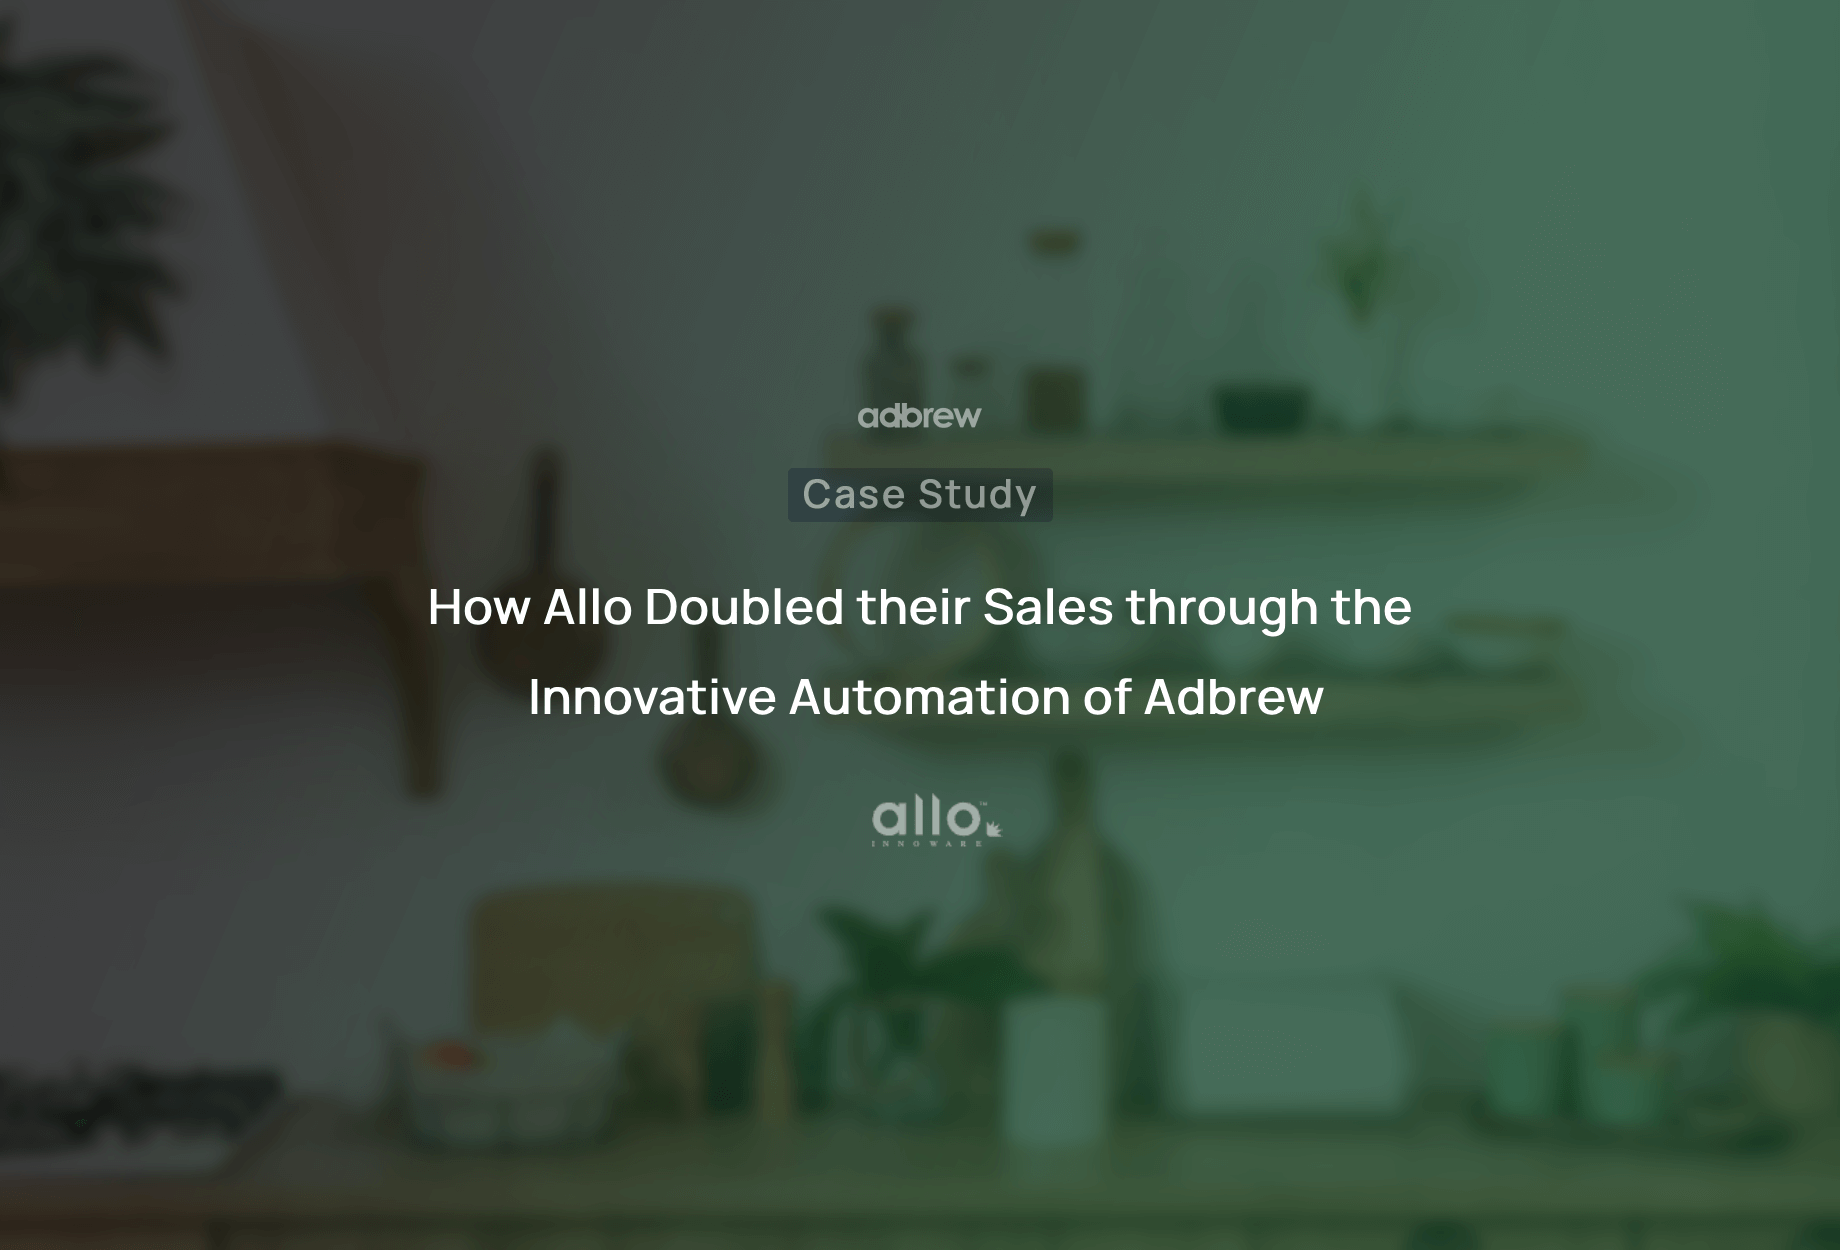 How Allo doubled their sales through Adbrew’s robust automation tools